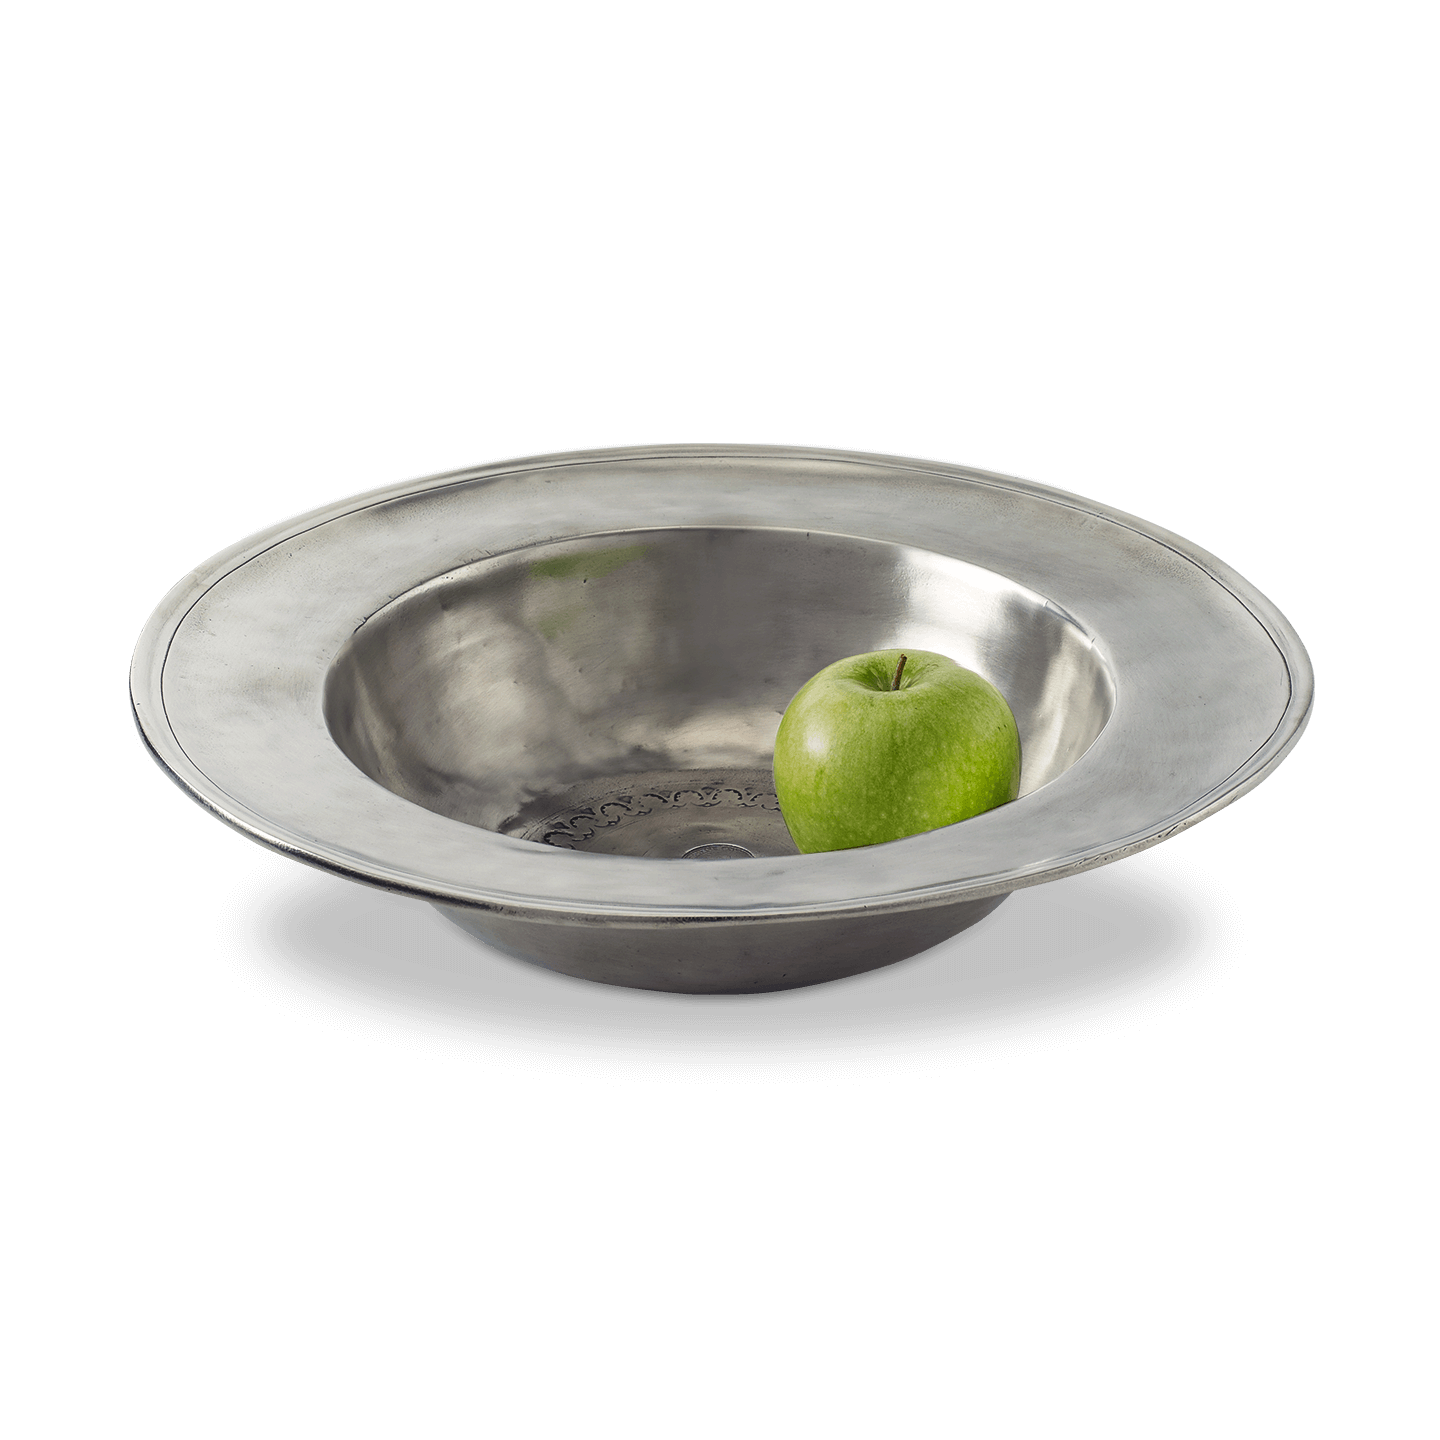 Match Pewter Round Crystal Bowl, Small